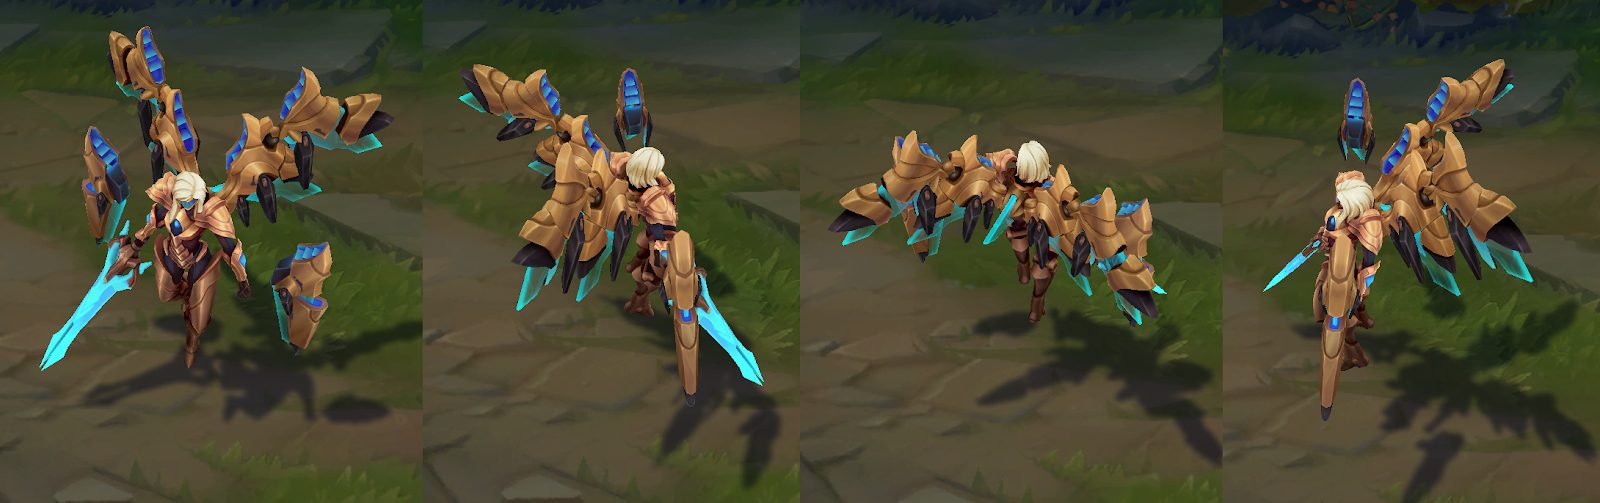 aether wing kayle lol